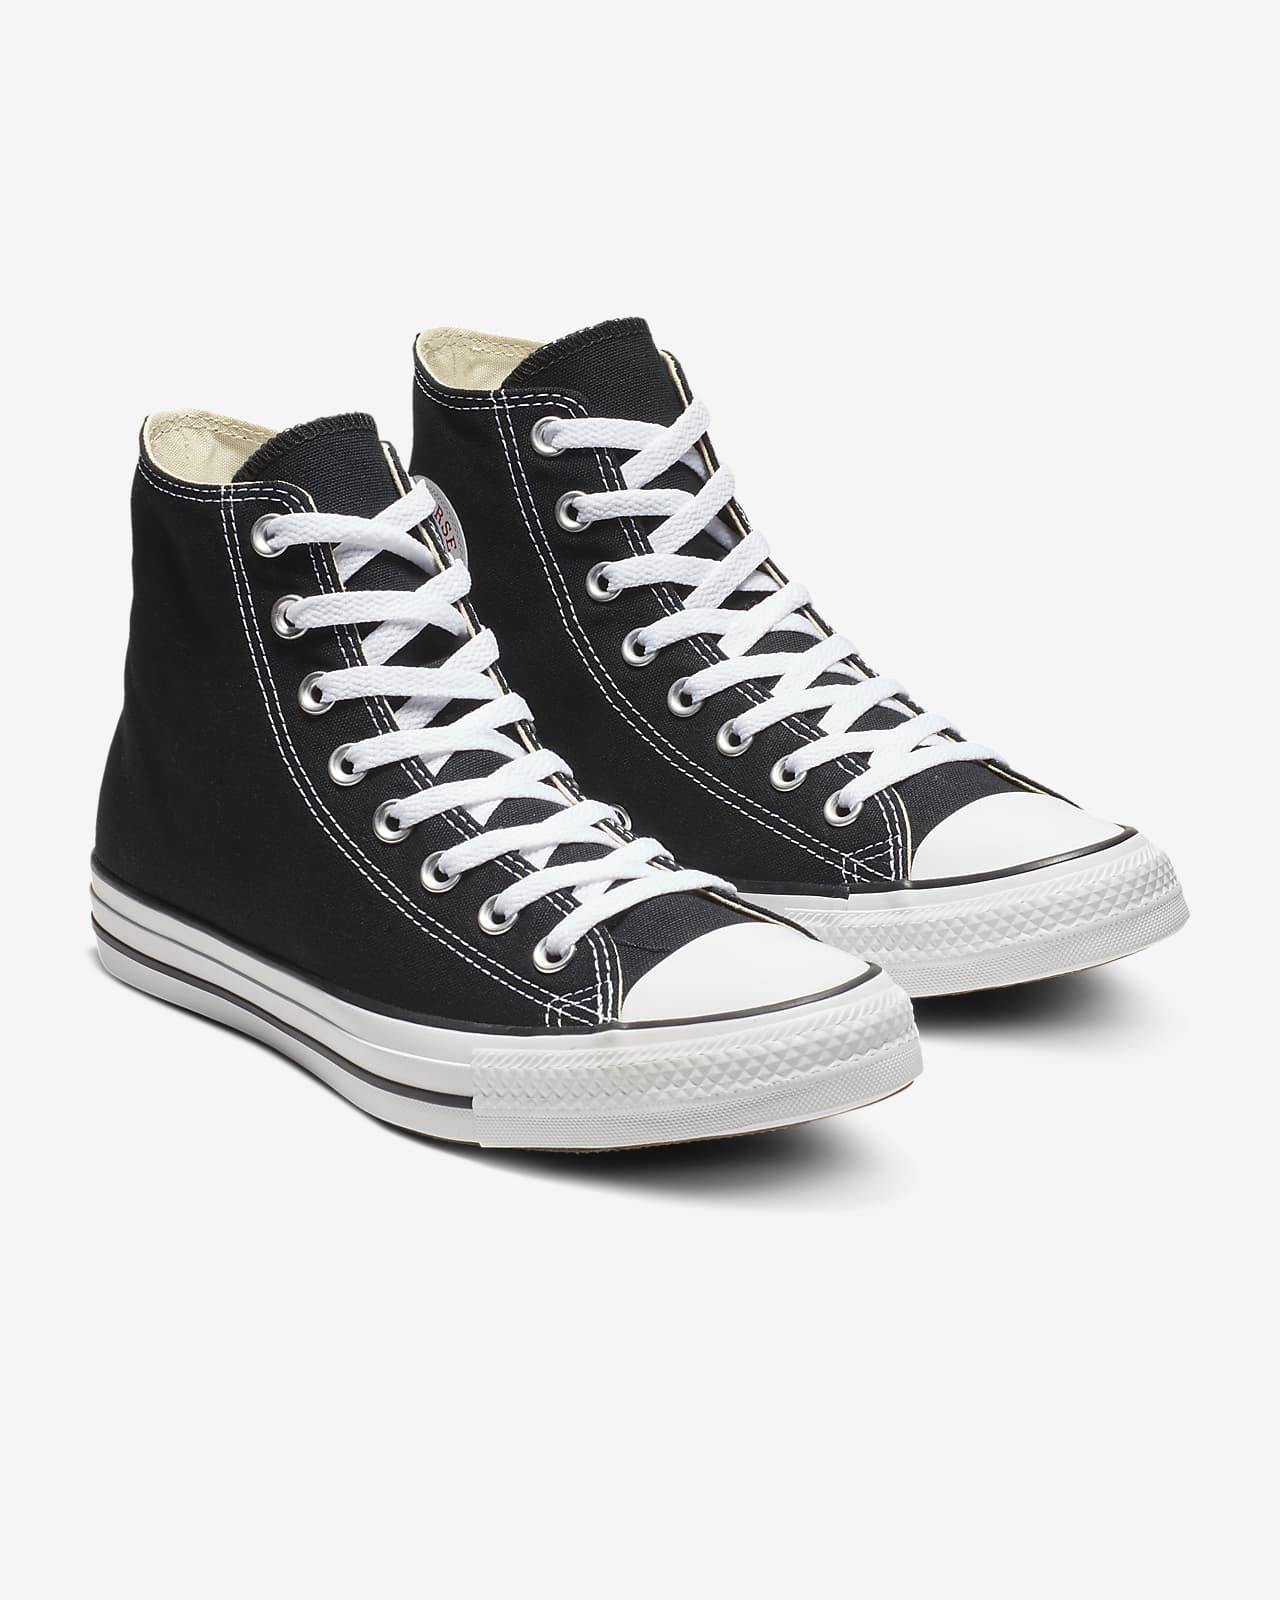 converse chuck taylor all star high top black sneakers